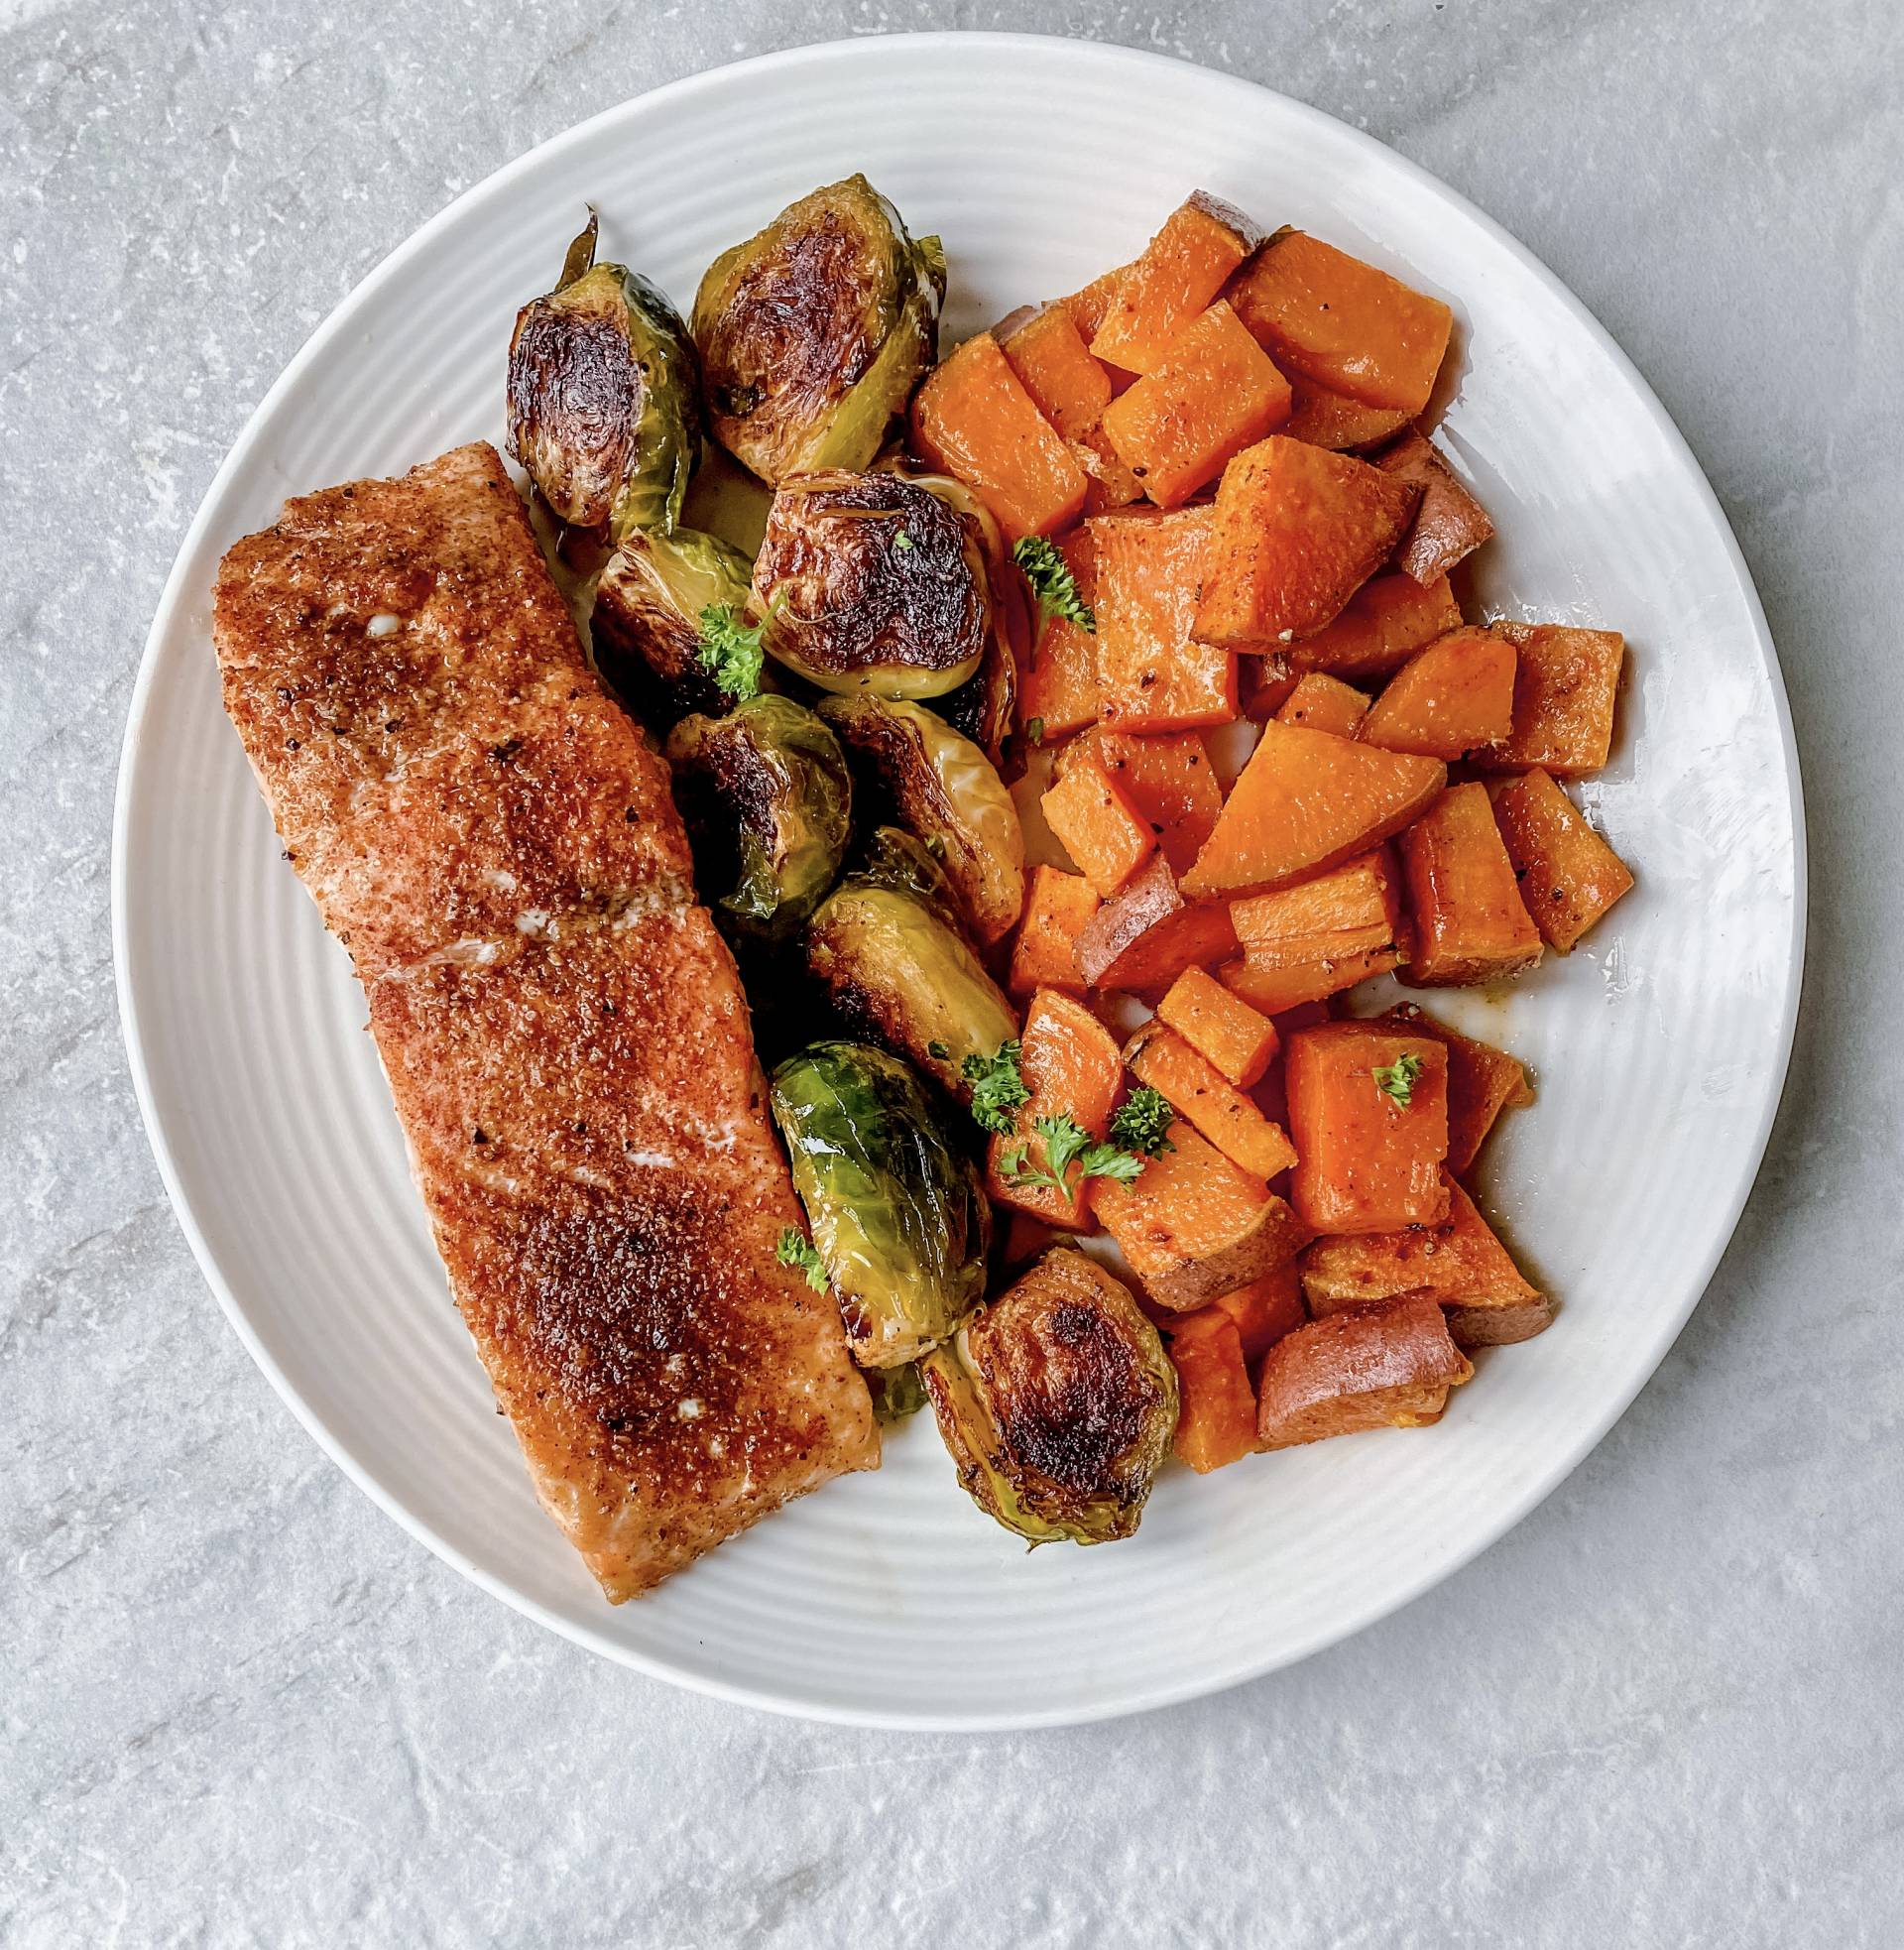 Blackened salmon with sweet potatoes and honey balsamic brussels sprouts